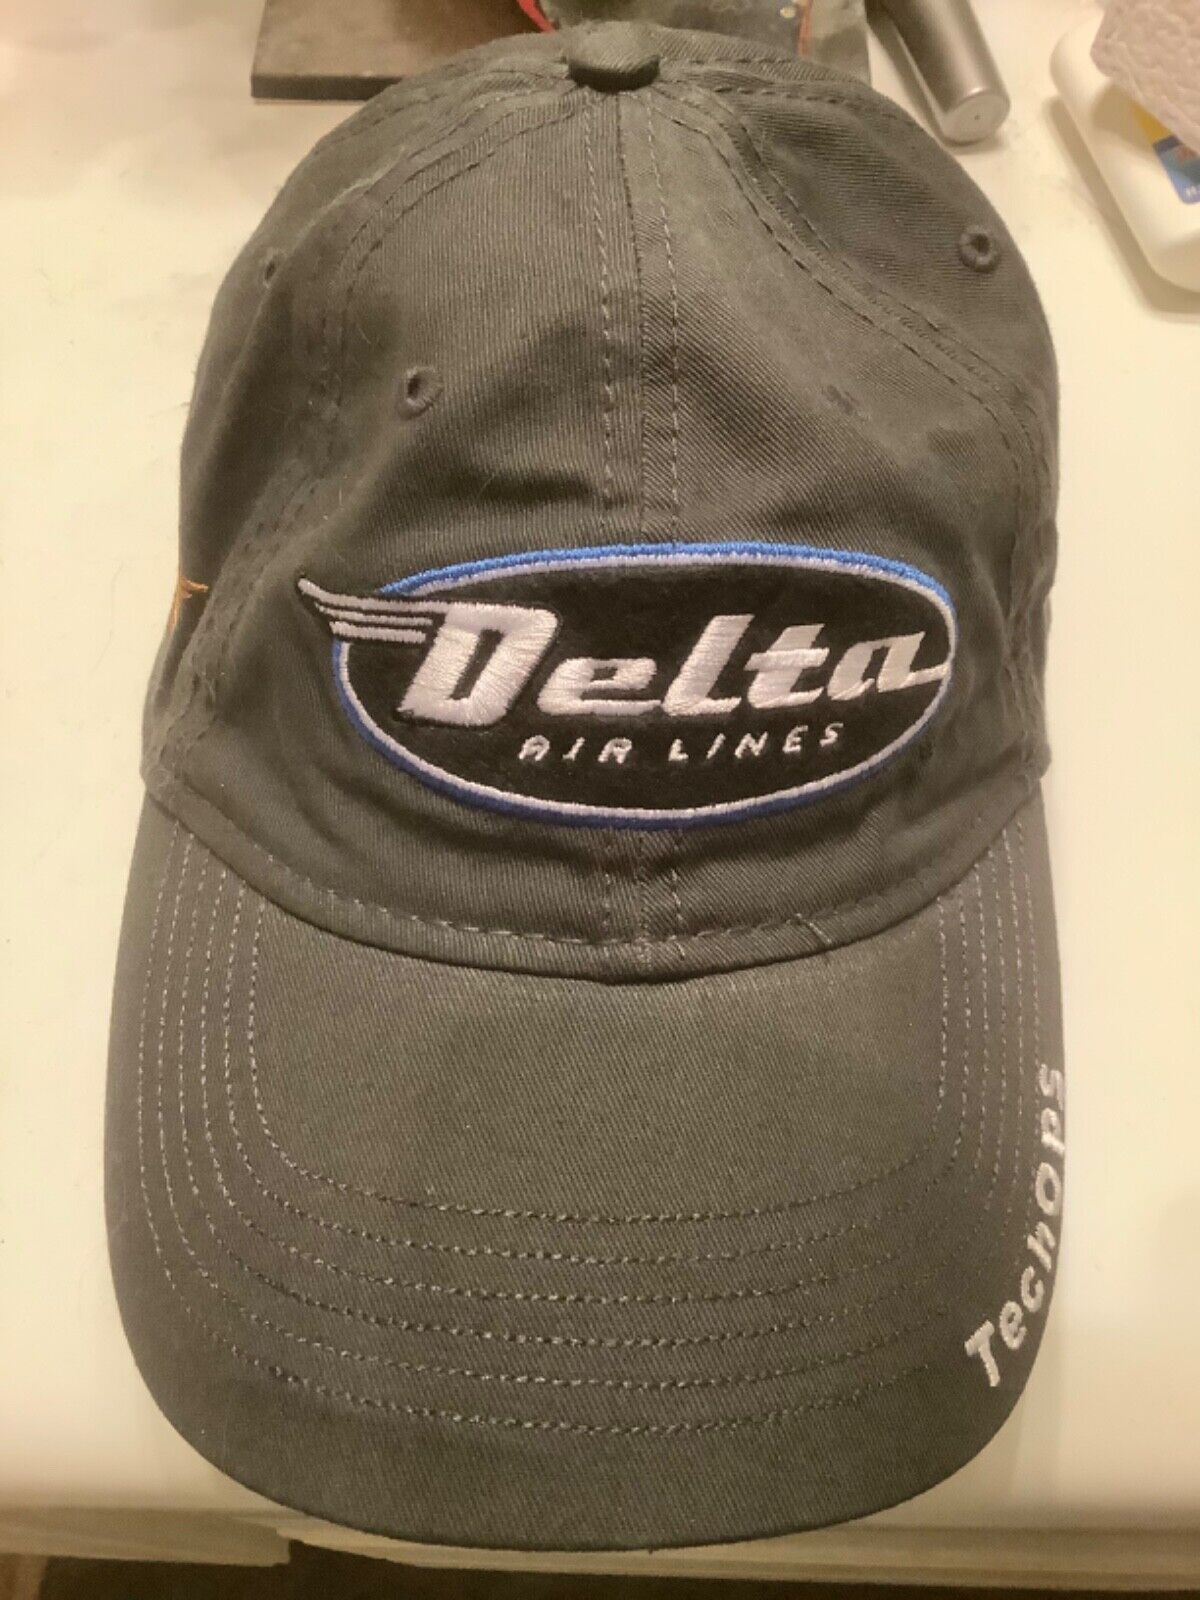 NEW OURAY DELTA AIRLINES TECHOPS ADJUSTABLE SIZE BASEBALL CAP